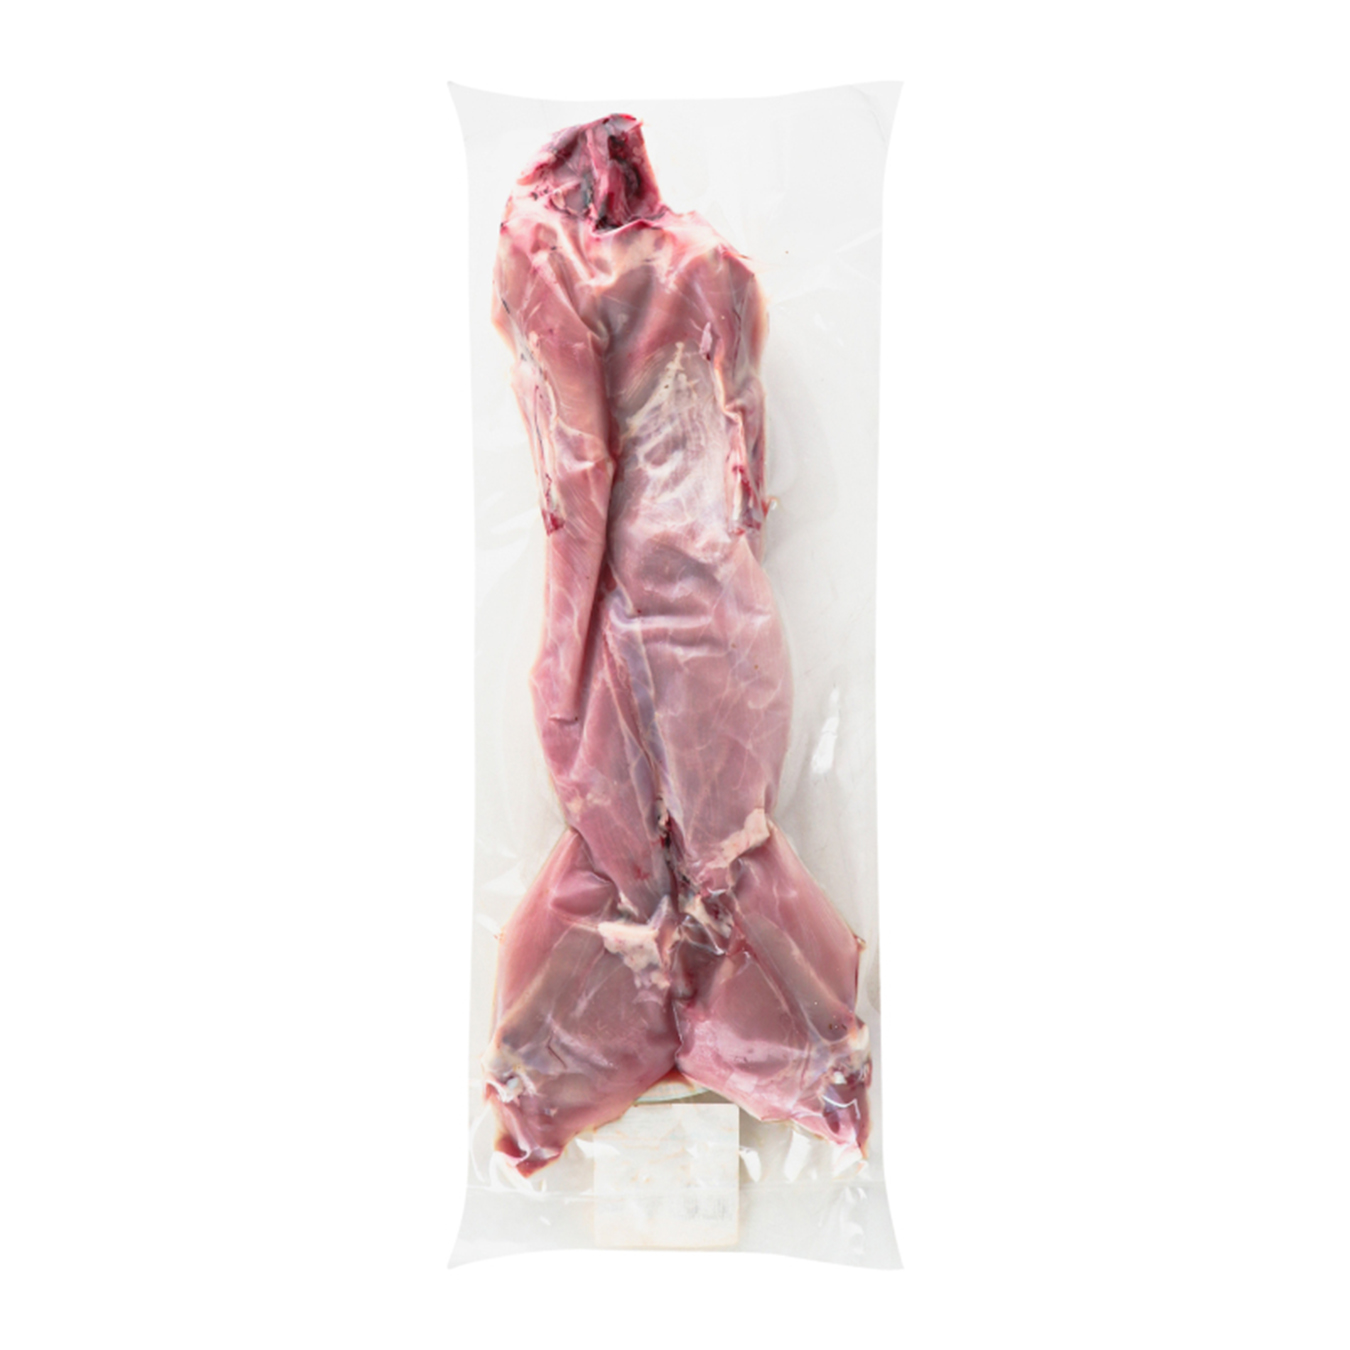 Brattsi Krolyky rabbit carcass chilled 950-1200 grams per package 2